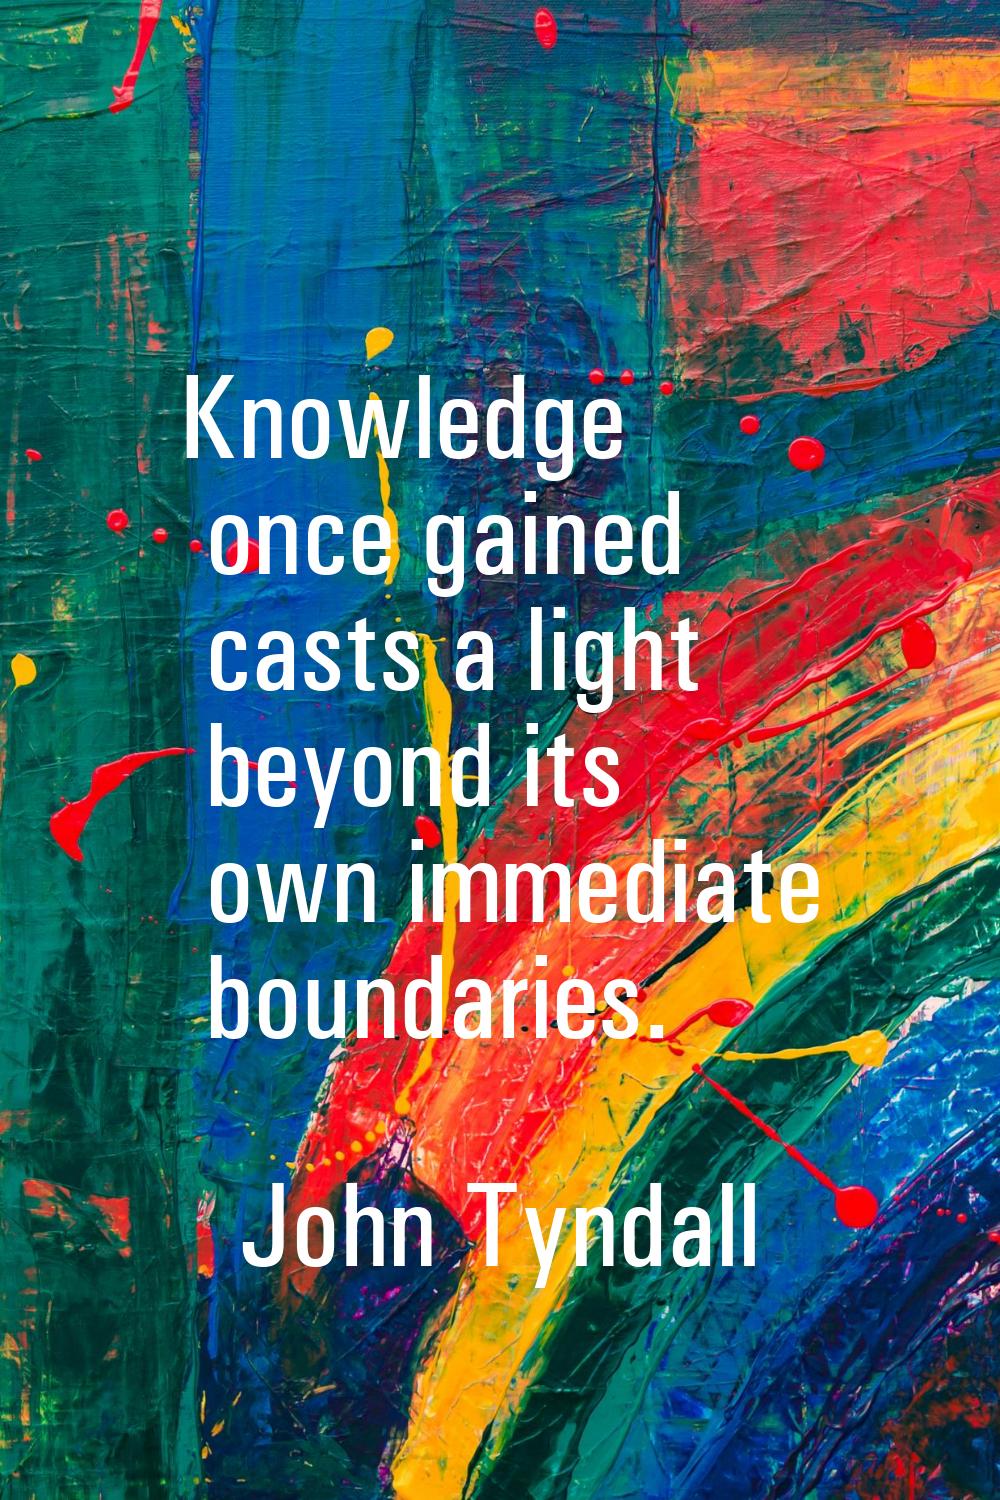 Knowledge once gained casts a light beyond its own immediate boundaries.